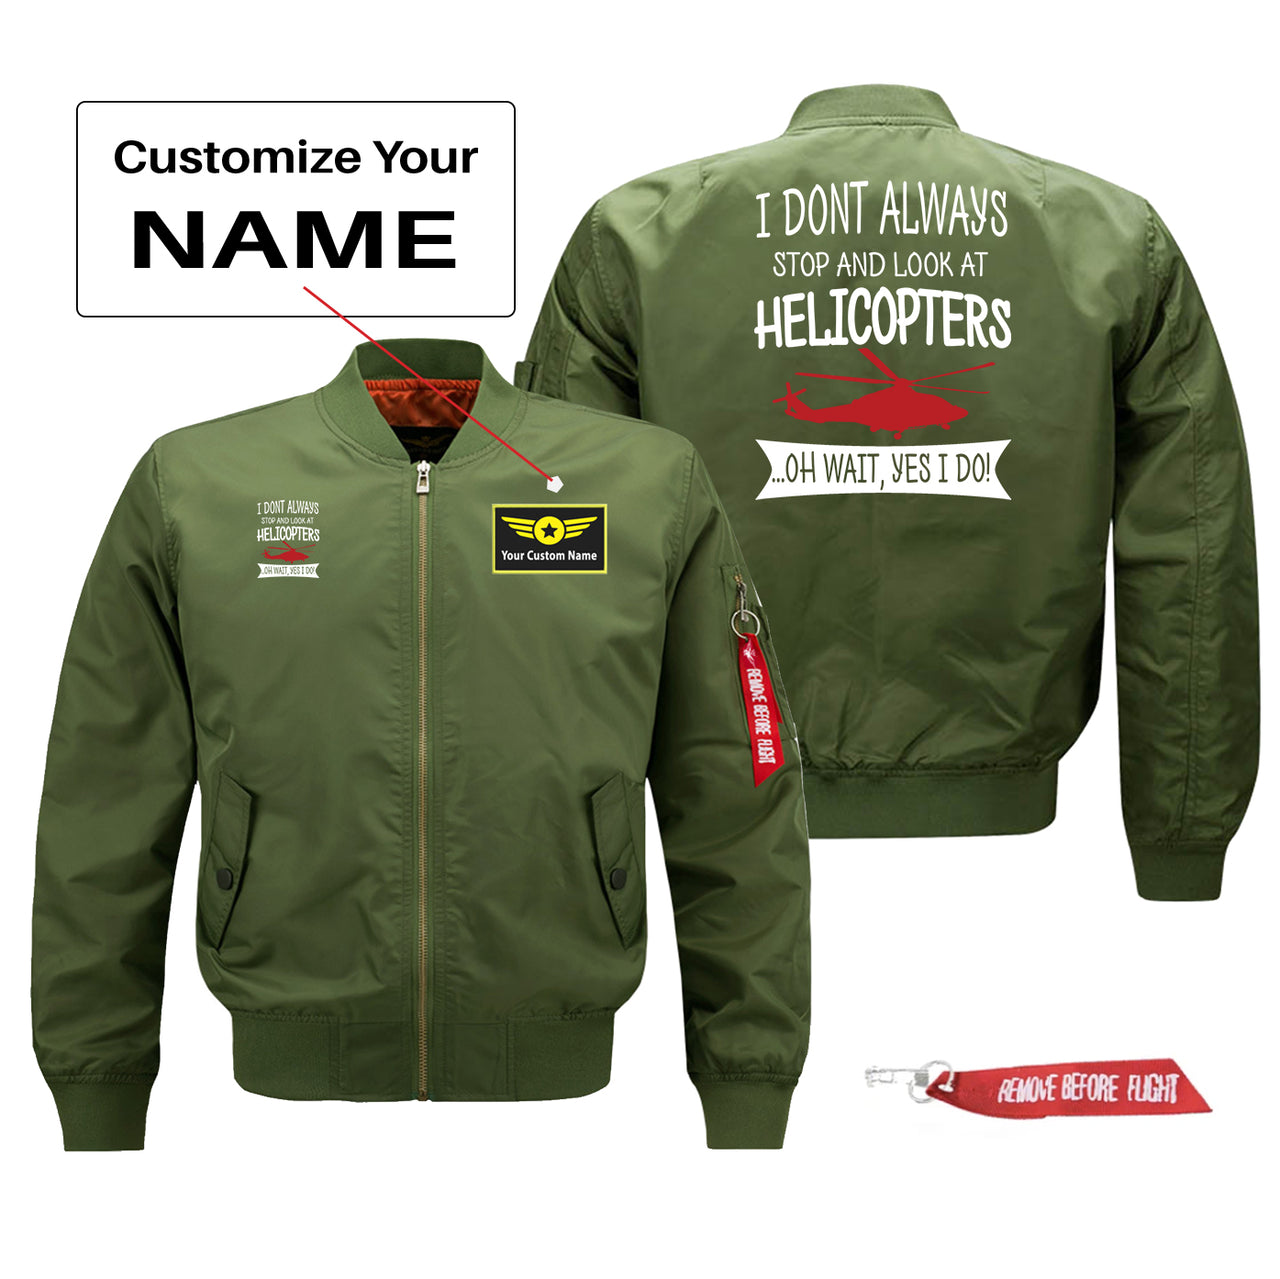 I Don't Always Stop and Look at Helicopters Designed Pilot Jackets (Customizable)